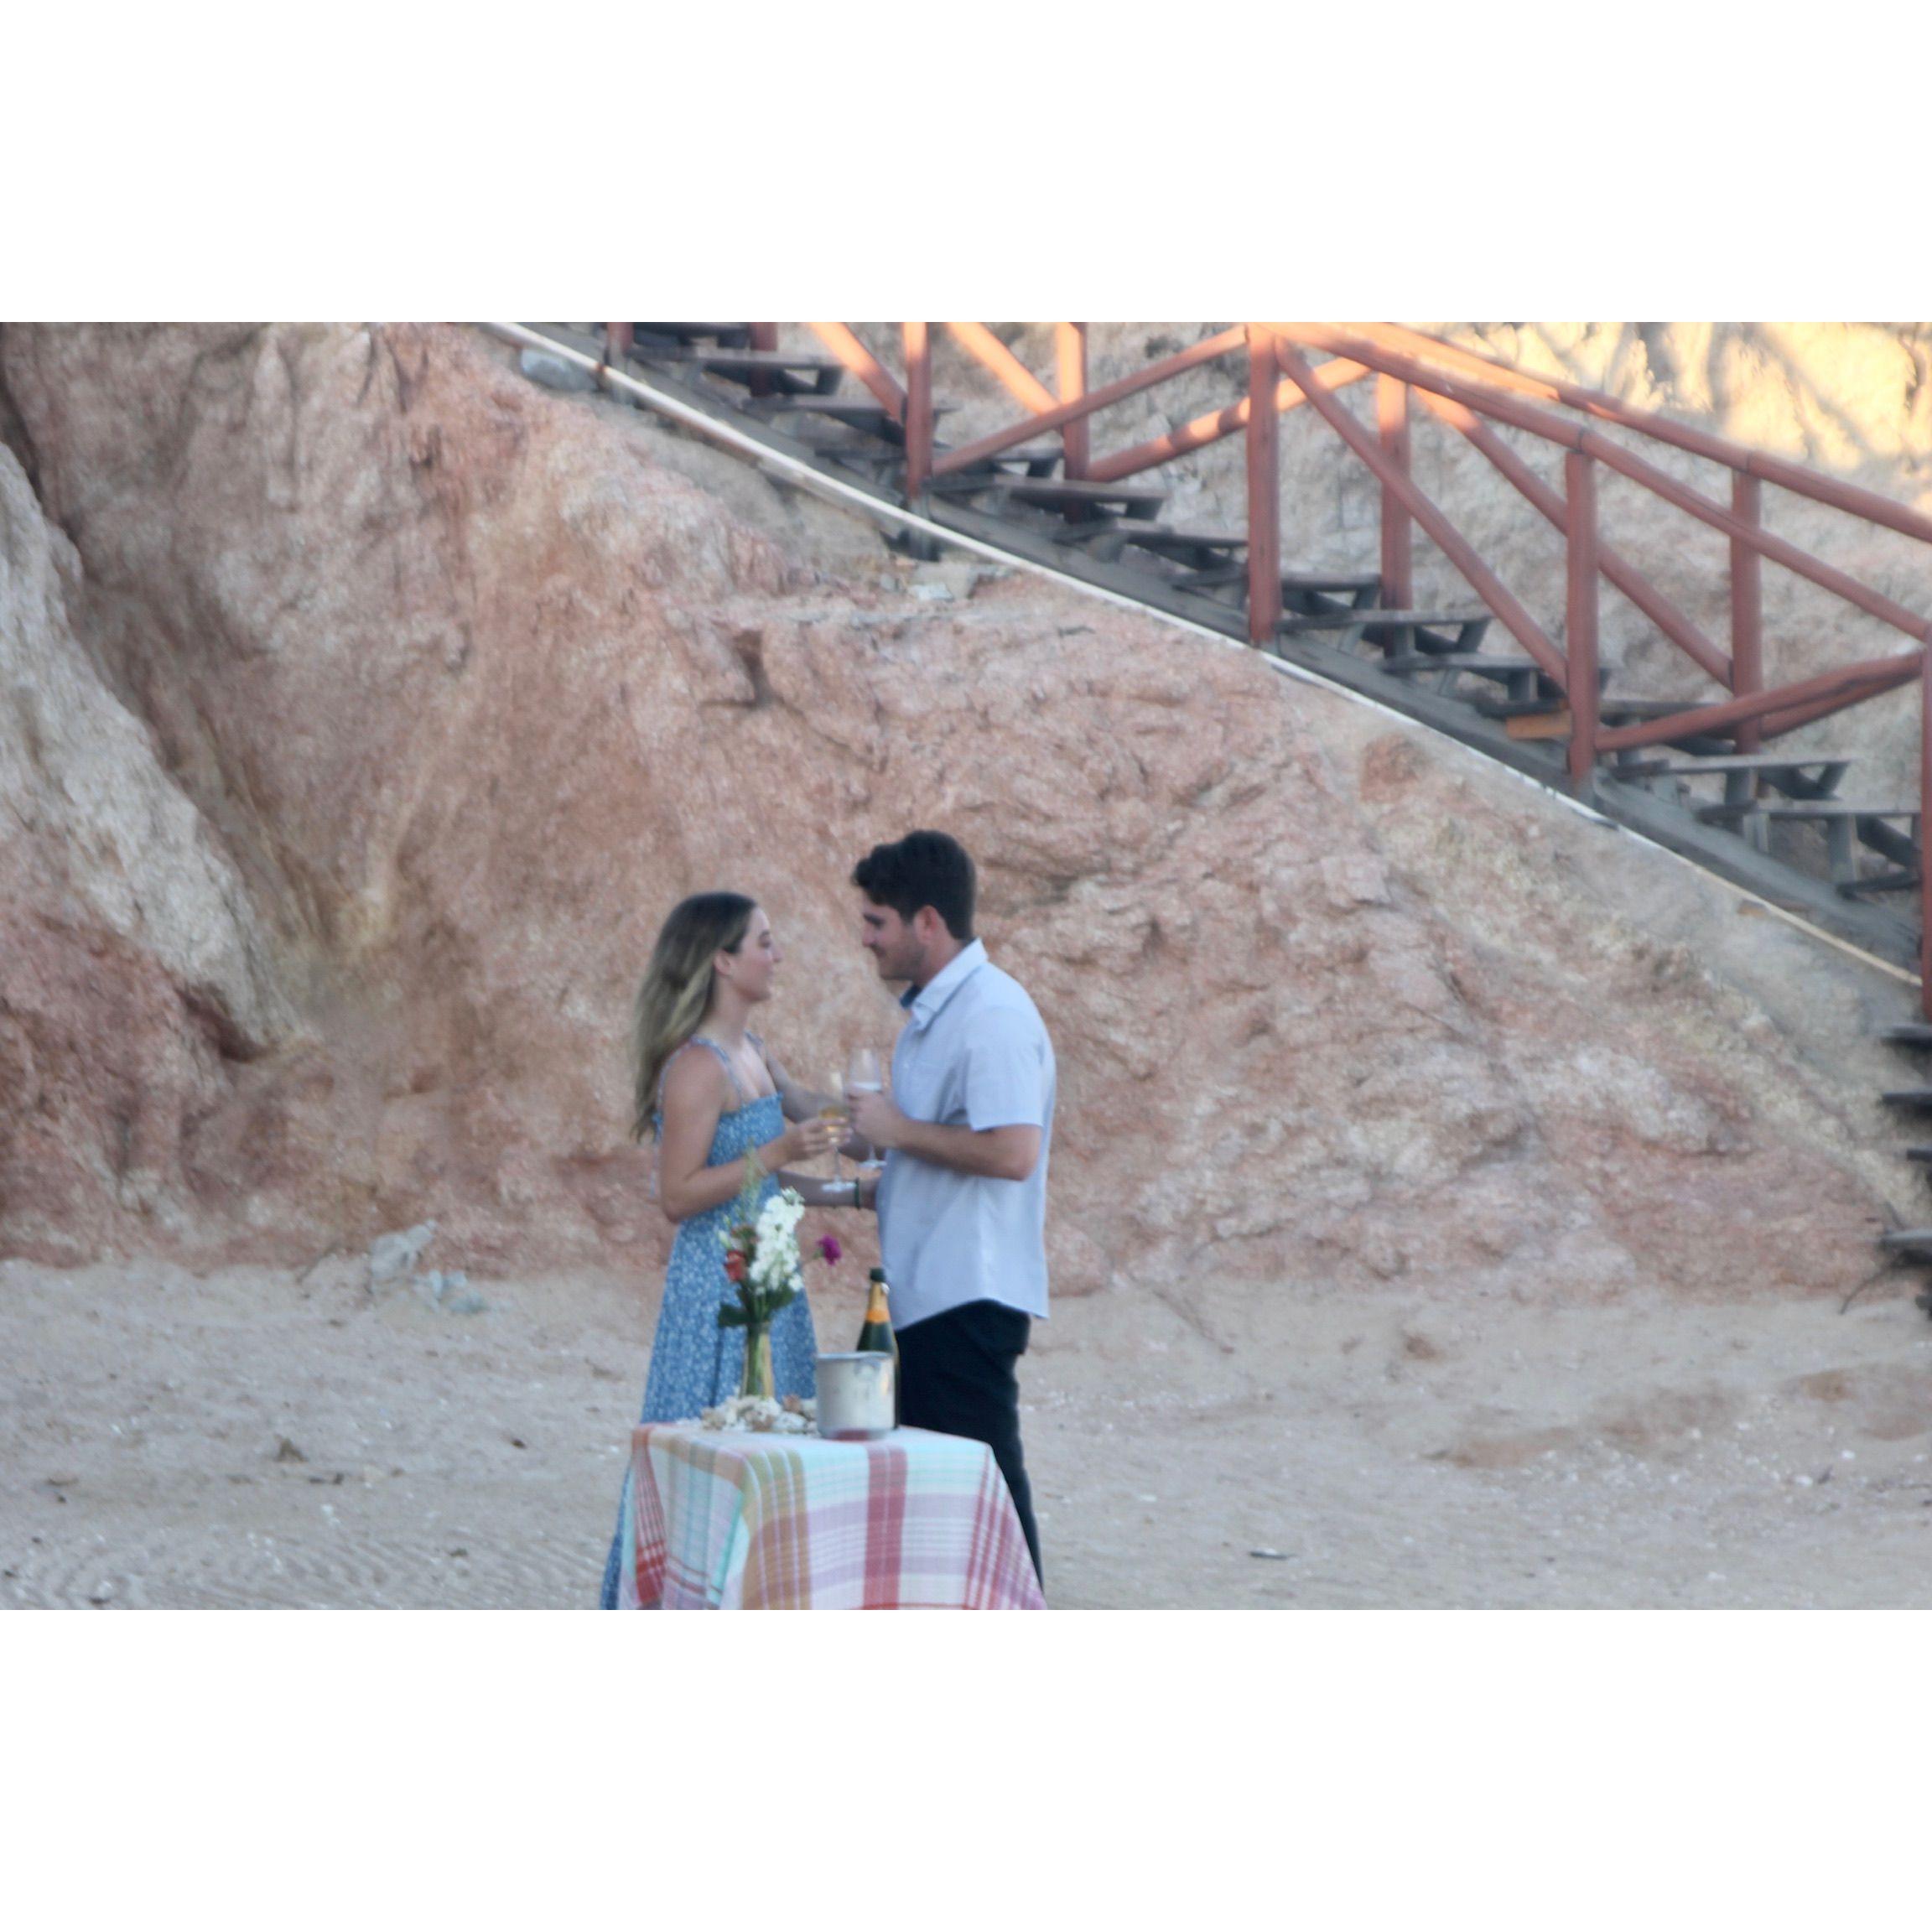 Our engagement in Cabo!